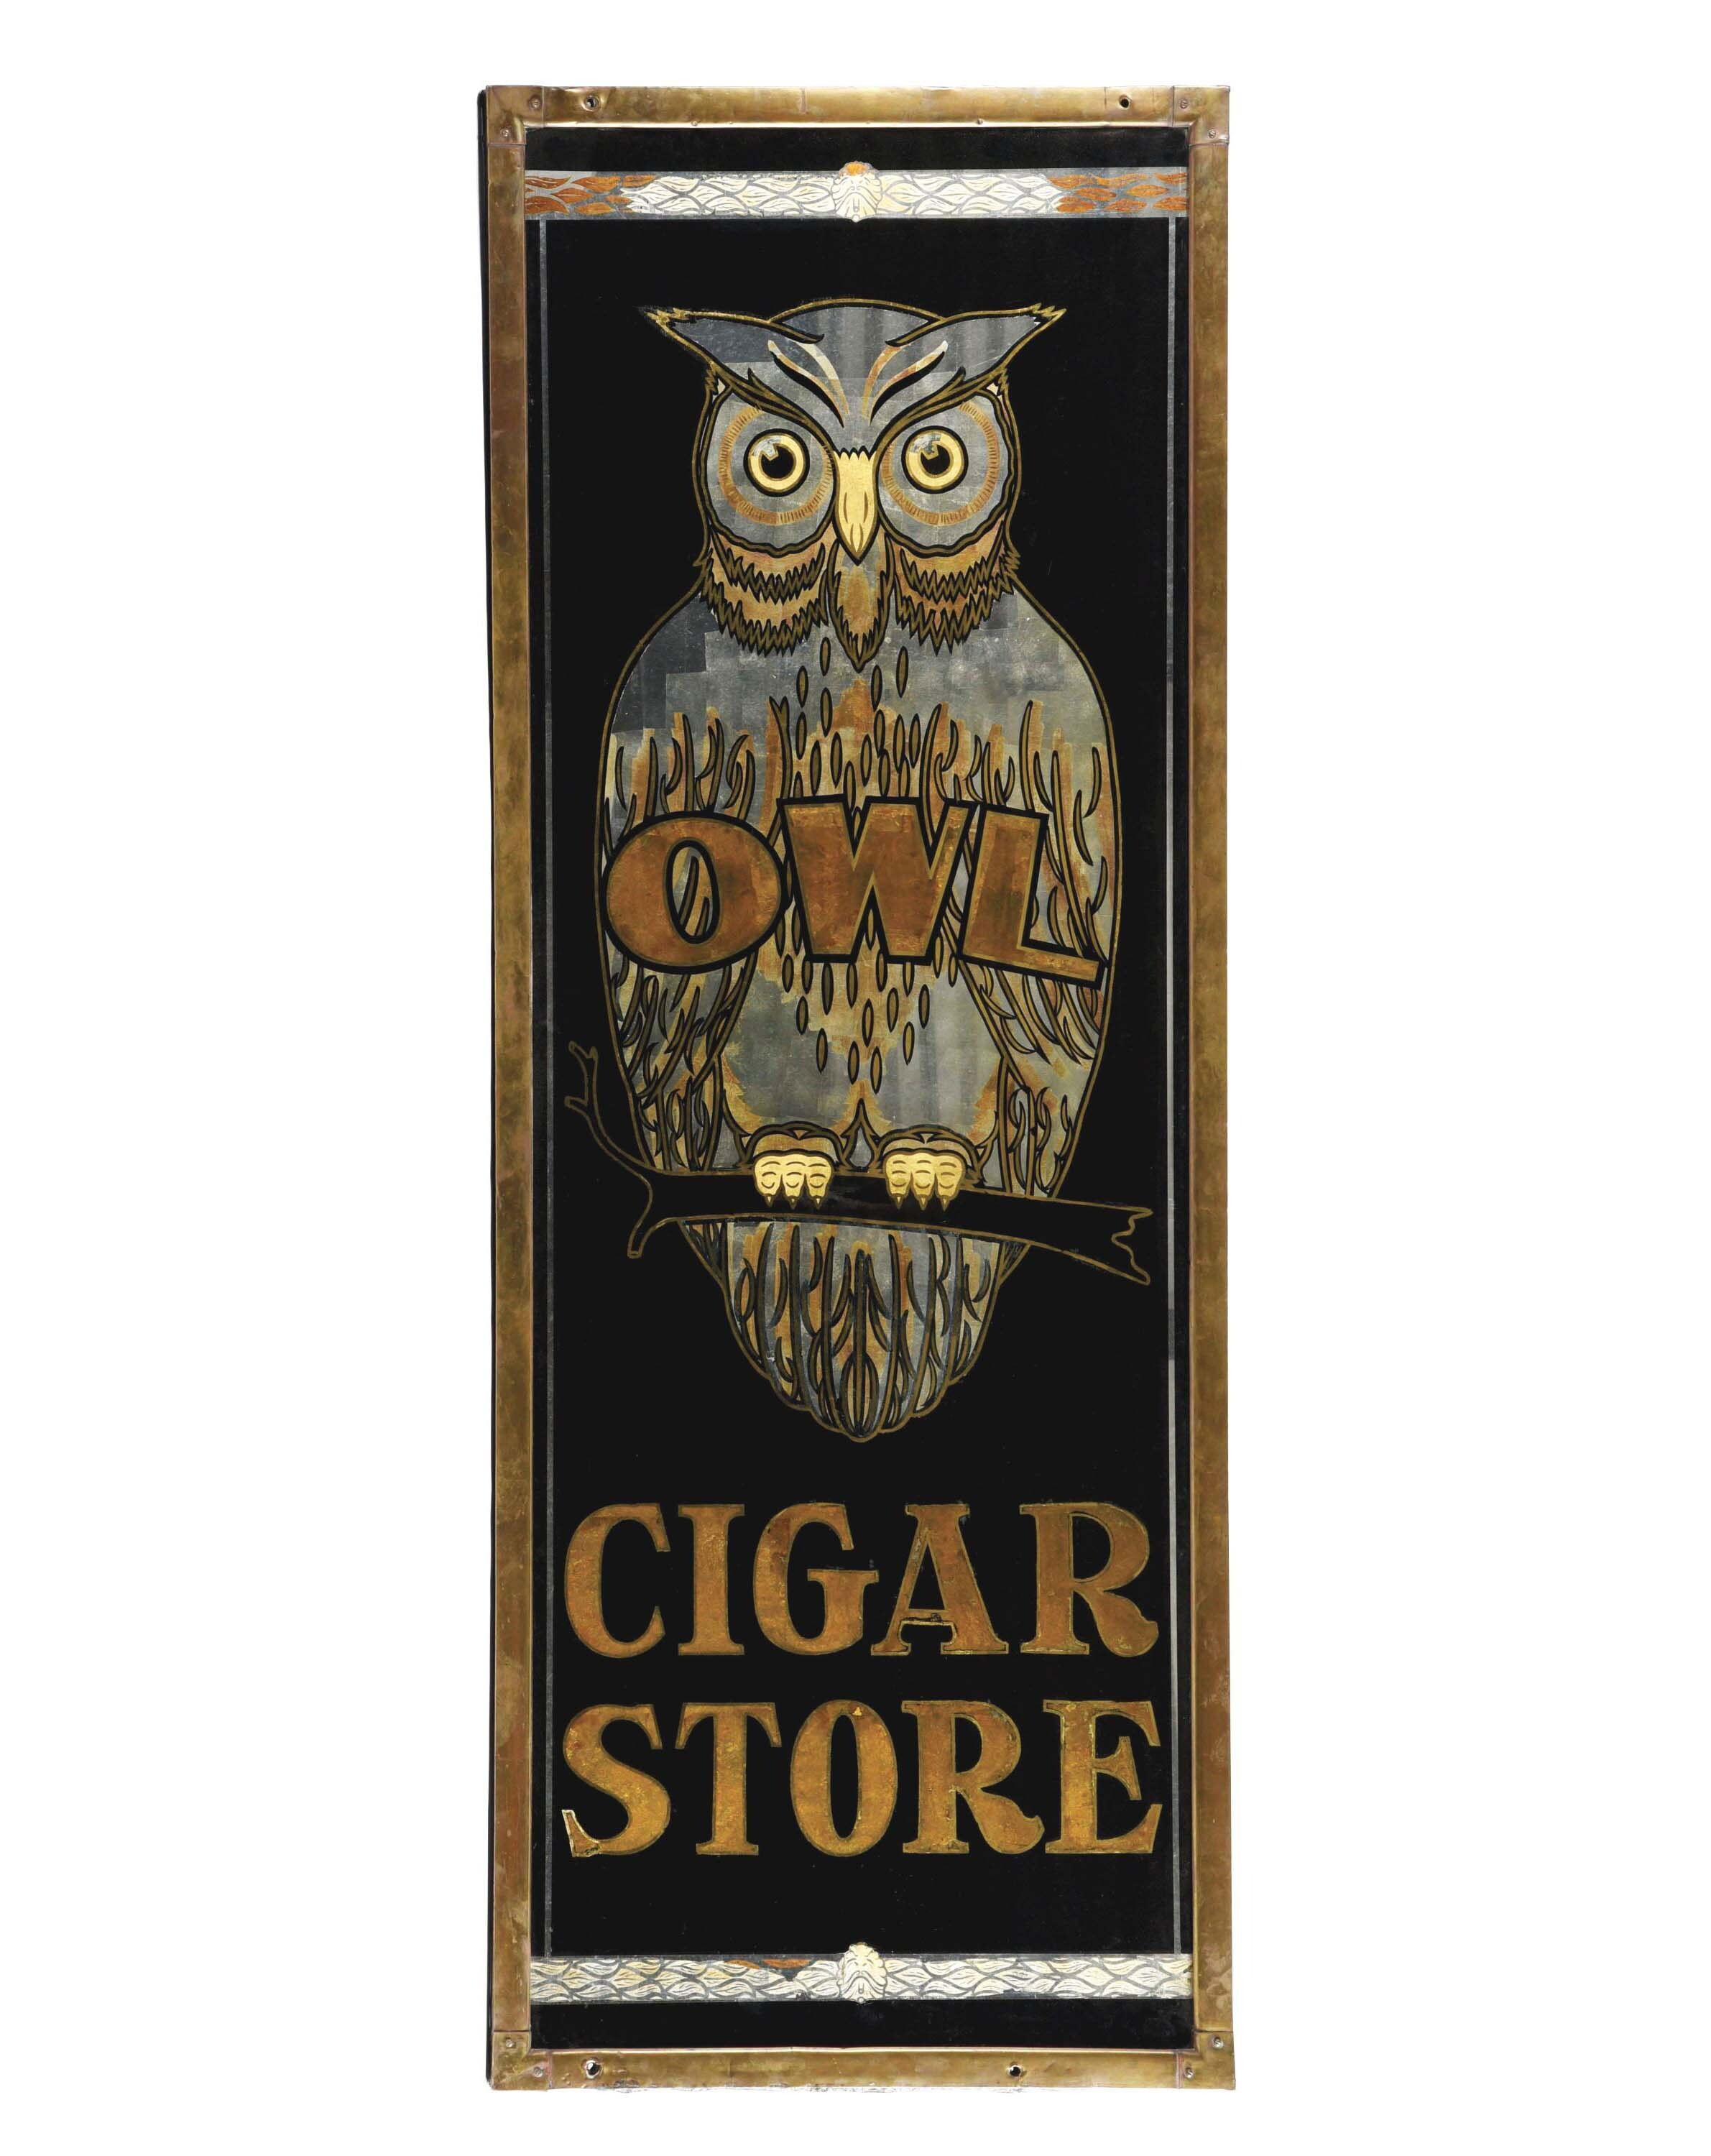 Antique reverse-on-glass Owl Cigar Store sign, possibly one of a kind. Size: 80 x 30¼in. Estimate $30,000-$60,000